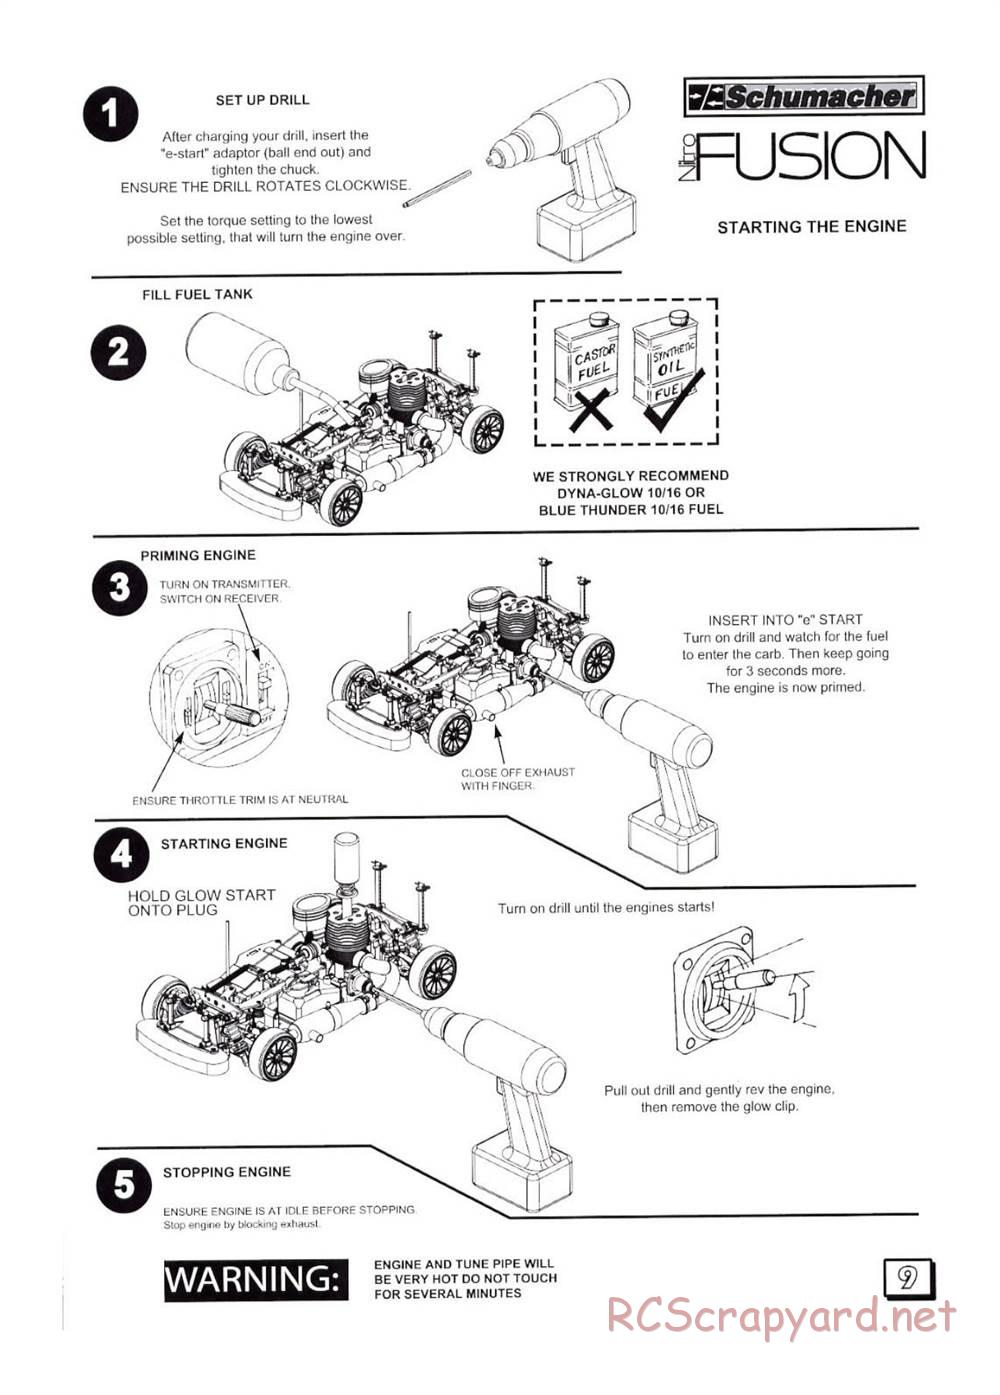 Schumacher - Fusion 21 - Manual - Page 25